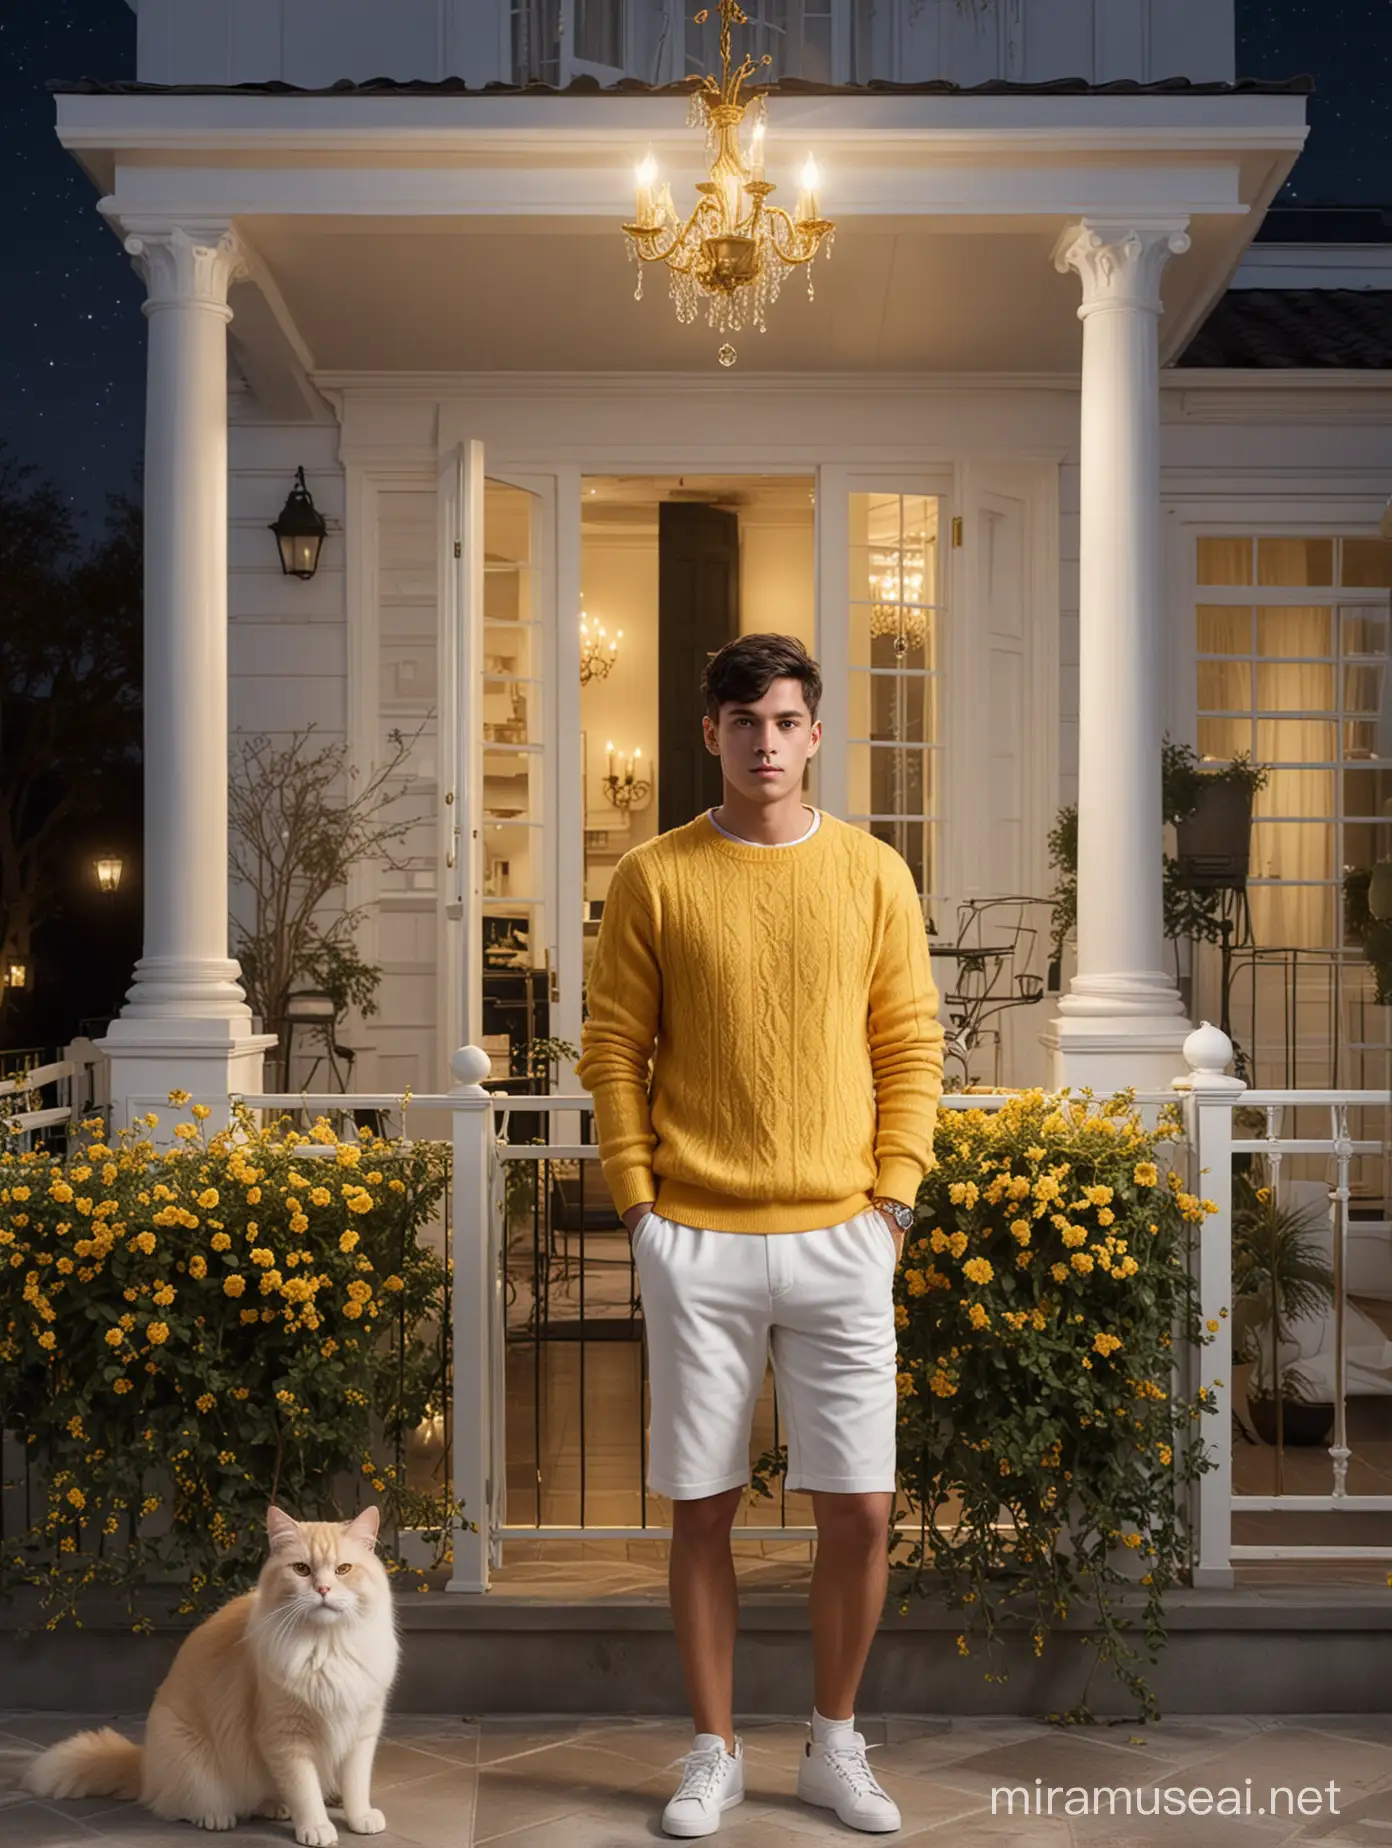 Luxurious White and Gold Terrace with Handsome Man and Yellow Cat at Night